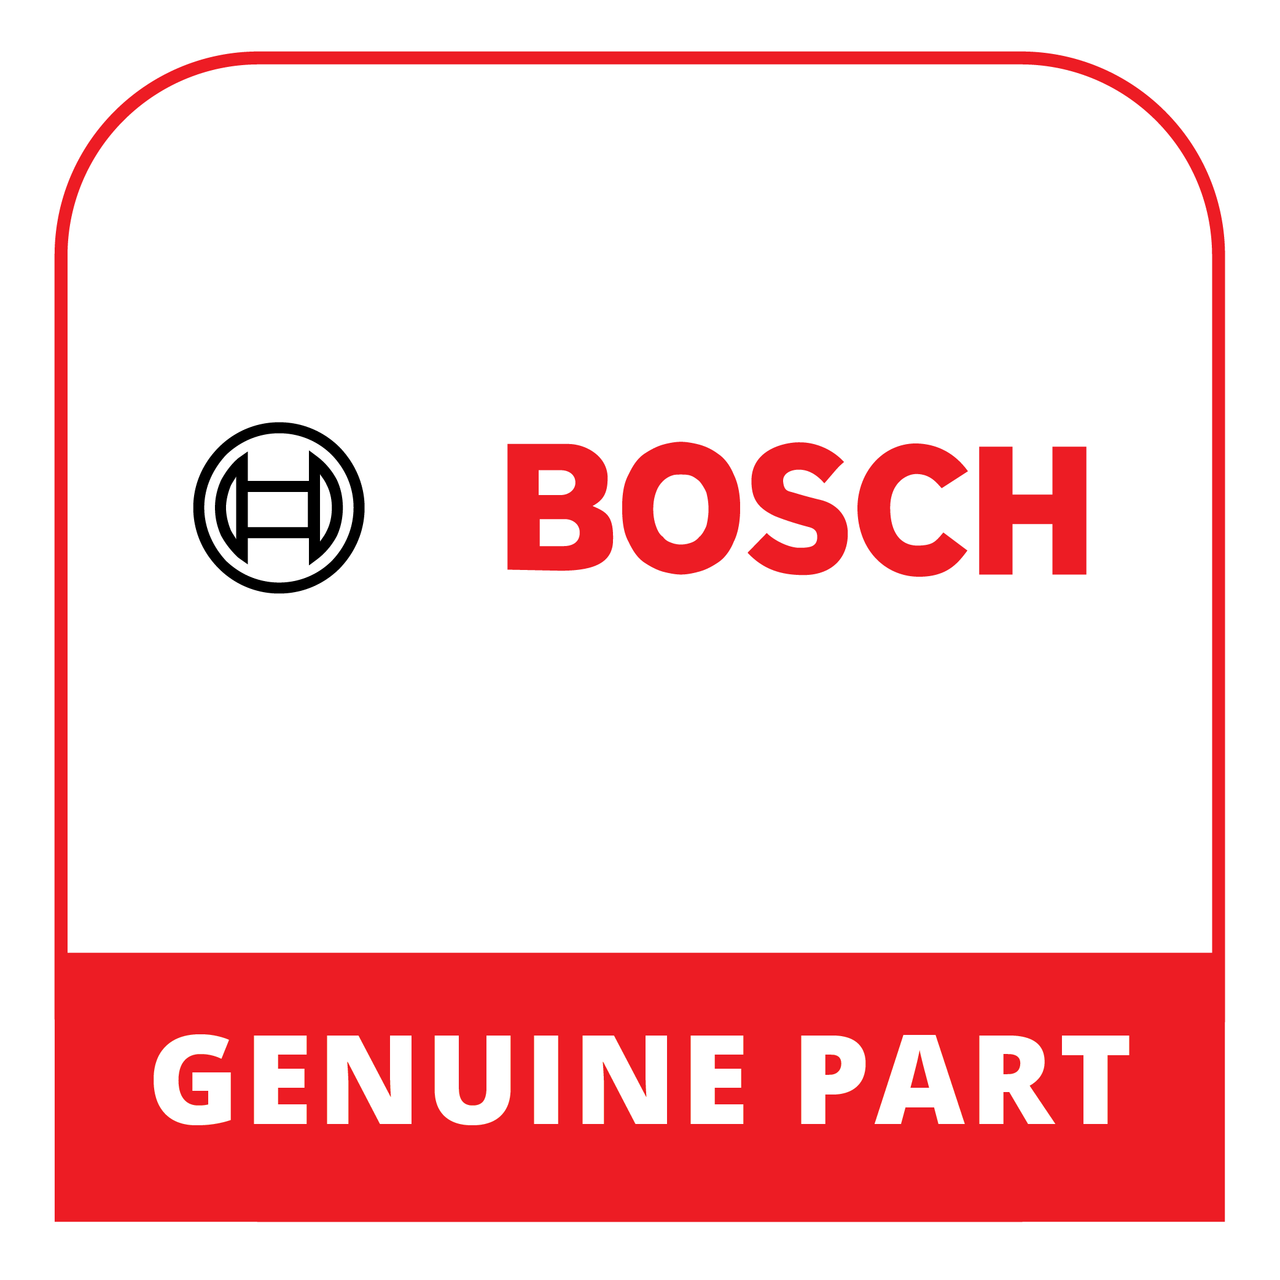 Bosch (Thermador) 12022452 - Rail - Genuine Bosch (Thermador) Part